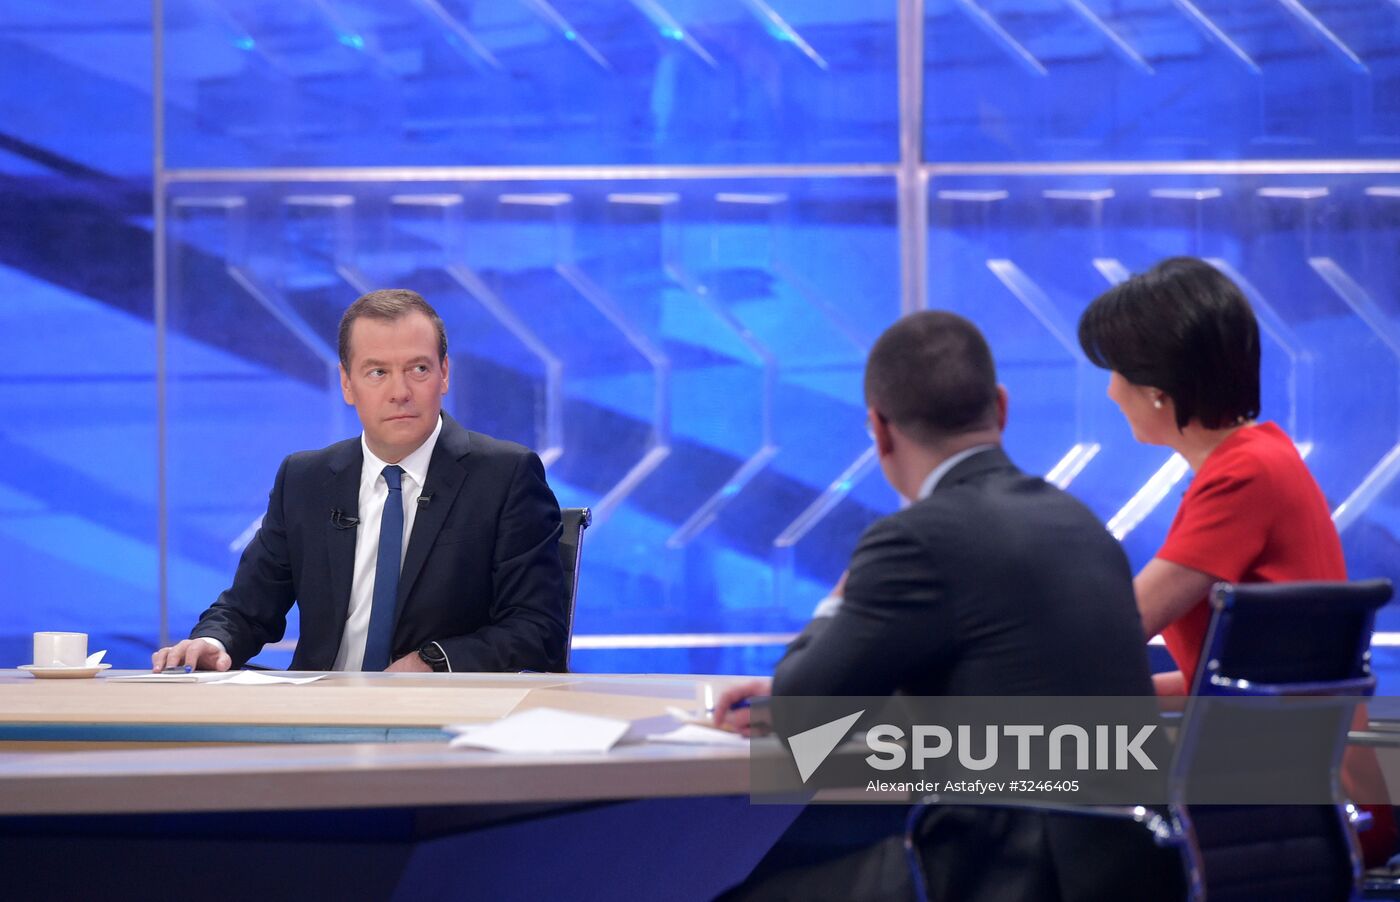 Russian Prime Minister Dmitry Medvedev's interview with Russian TV channels